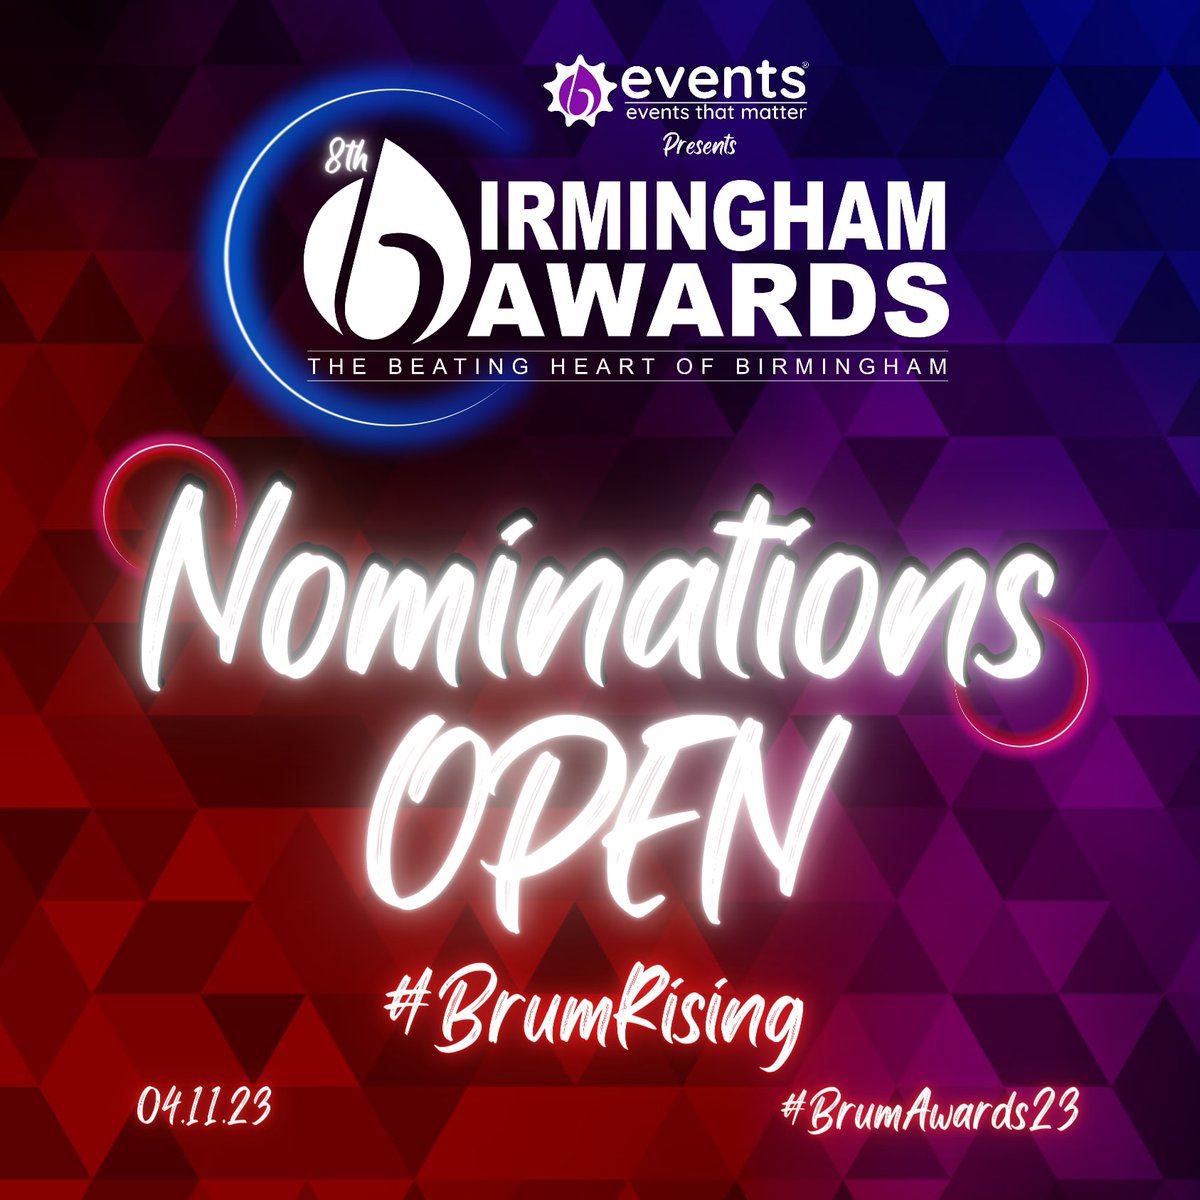 Nominations are now open for the 8th Birmingham Awards - This year's theme is #BrumRising to celebrate the rise & growth of #Birmimgham This # is used to bring attention to the amazing things happening in the city & to show pride in our community. Nominate Now! #BrumAwards23